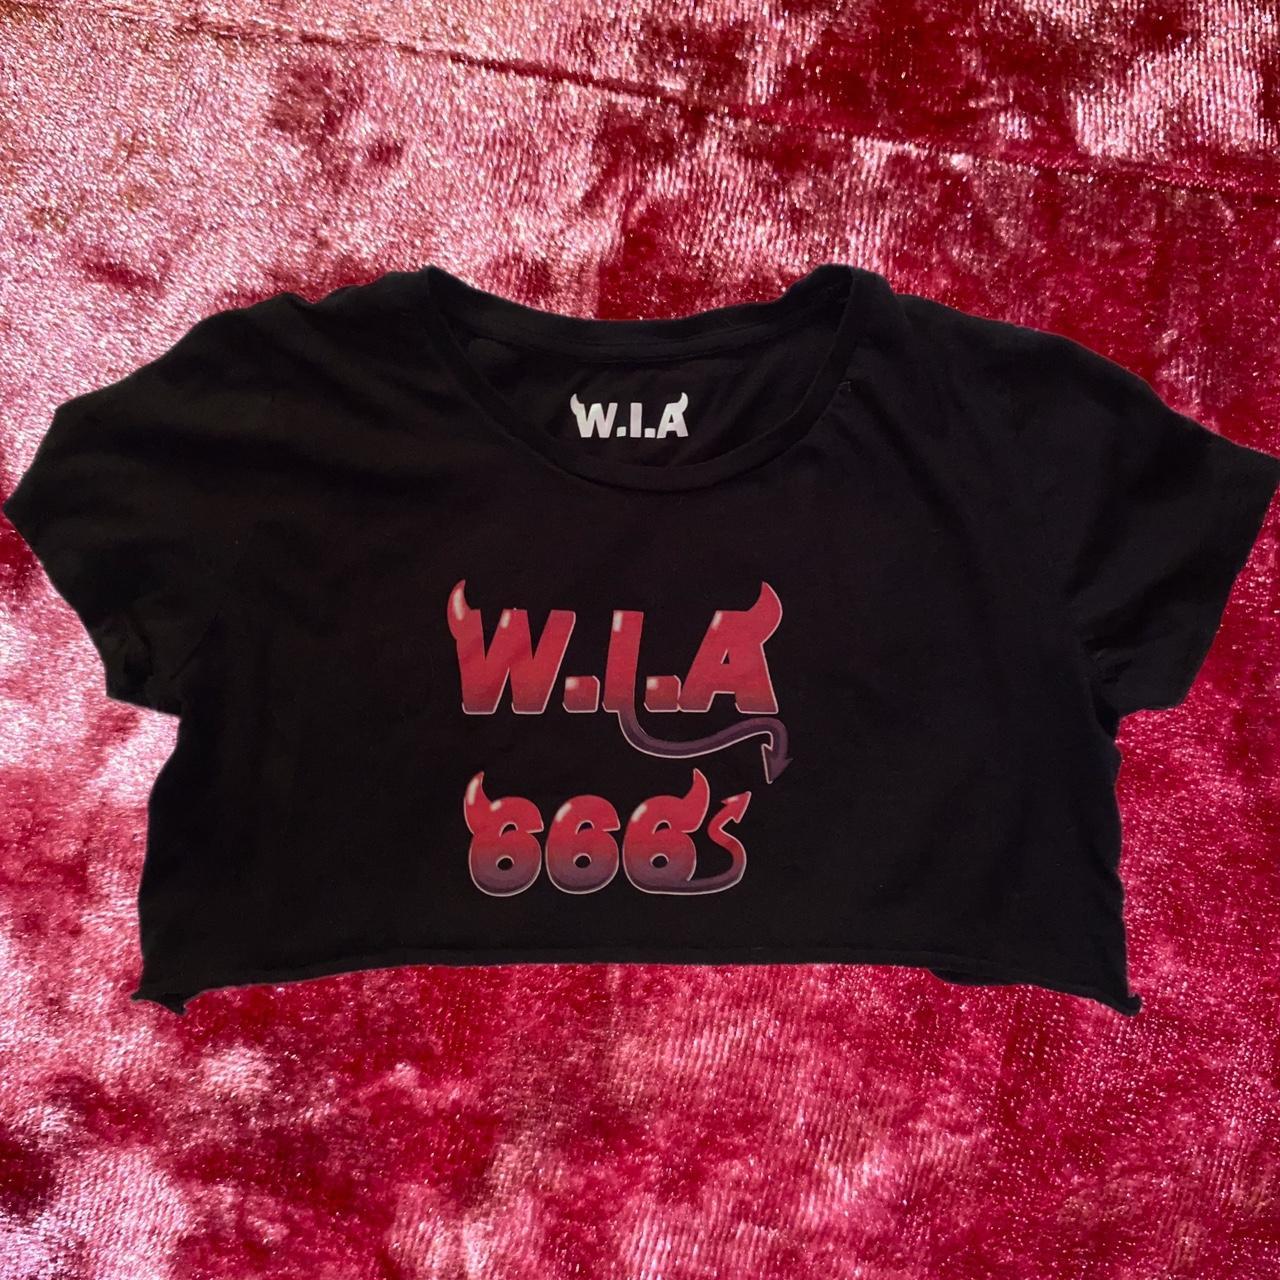 Product Image 1 - W.I.A Collections 666 crop t-shirt👹❤️‍🔥


#wia